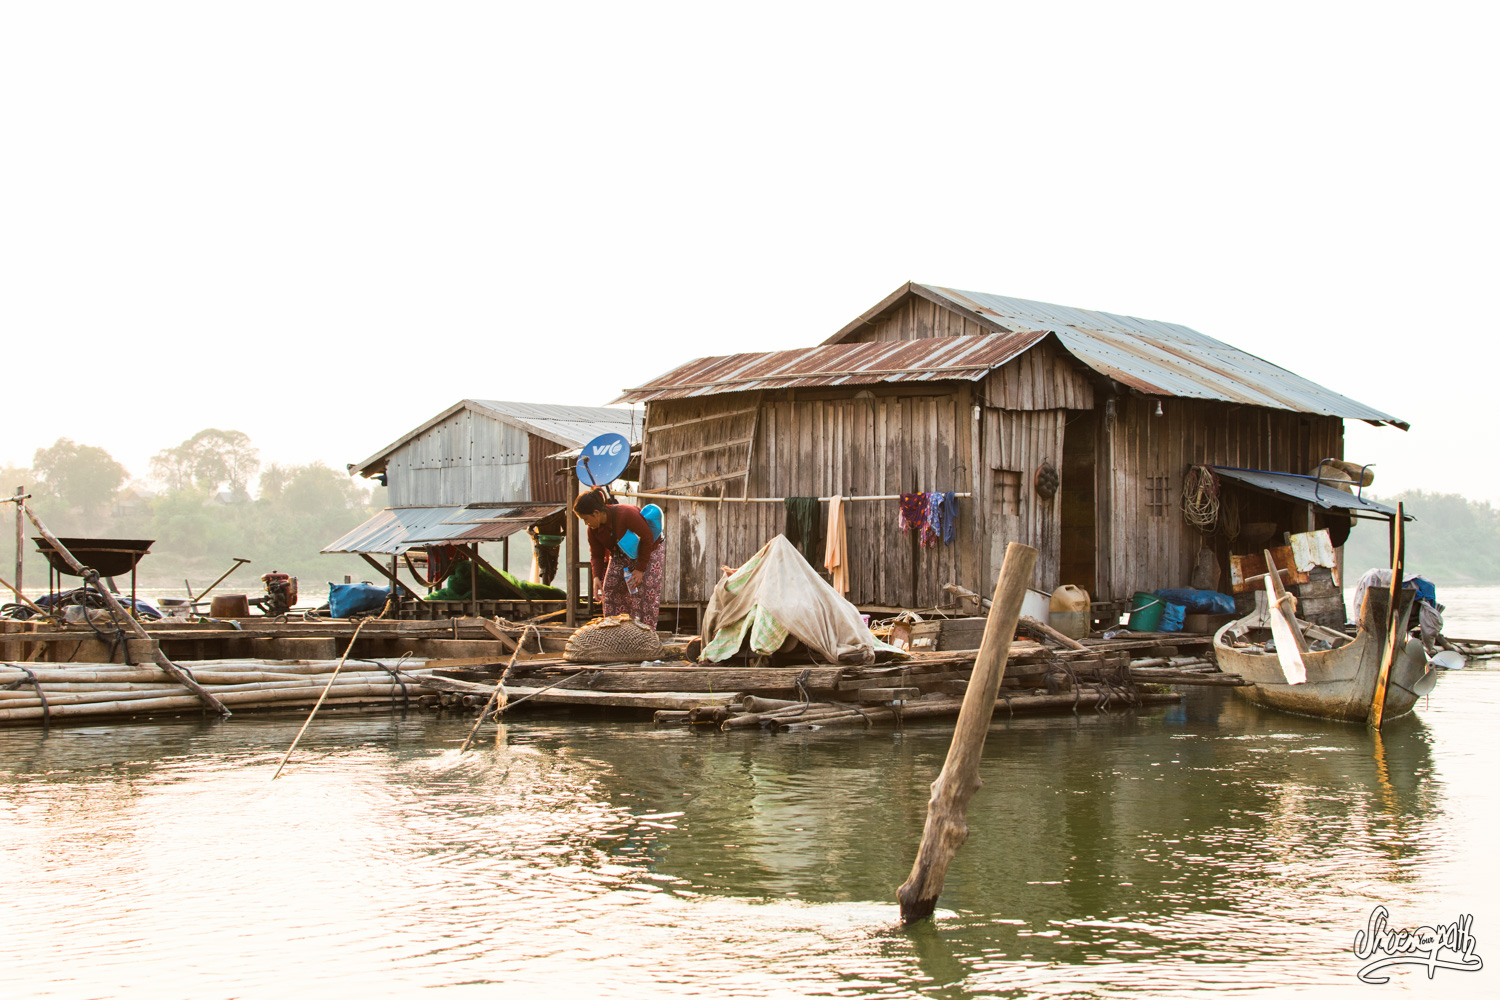 Sunset over the floating village of Kho Trong on the Mekong